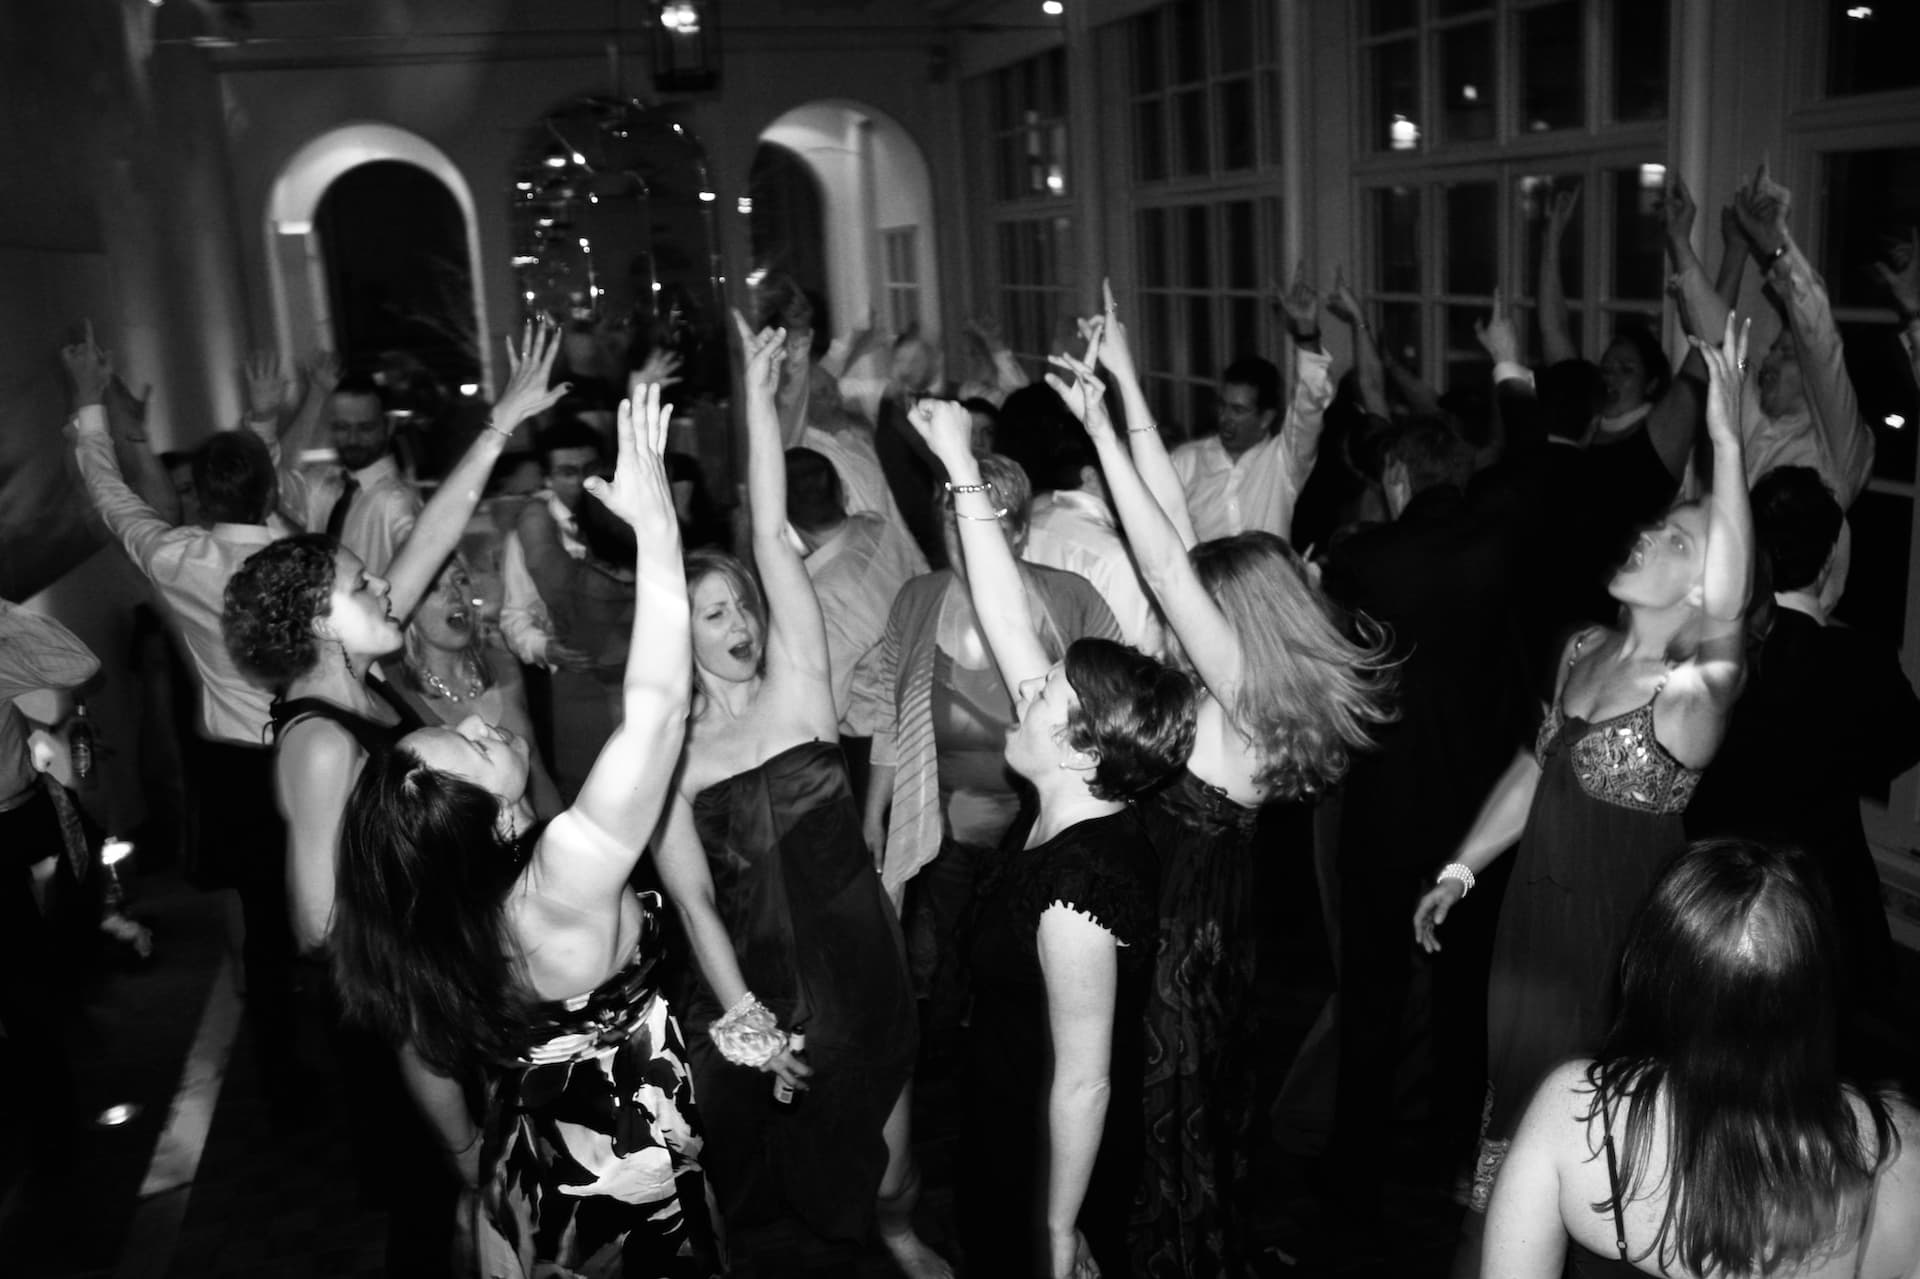 A dance floor full of people dancing with their arms in the air!